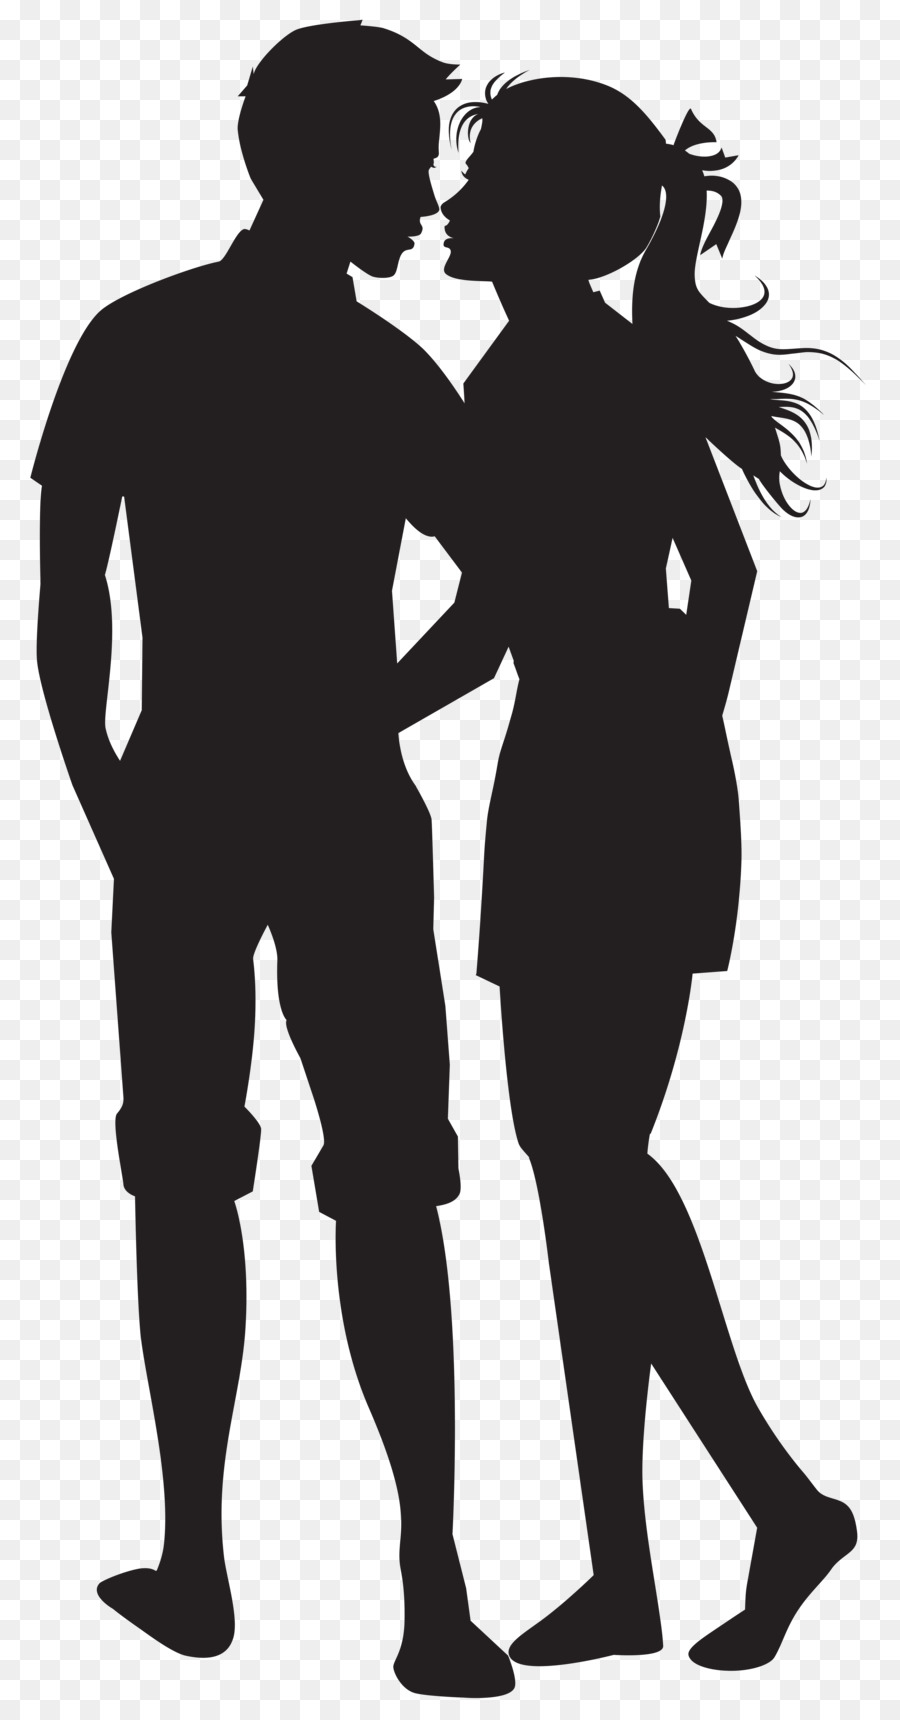 couple Clip art - couple png download - 4194*8000 - Free Transparent Couple png Download.